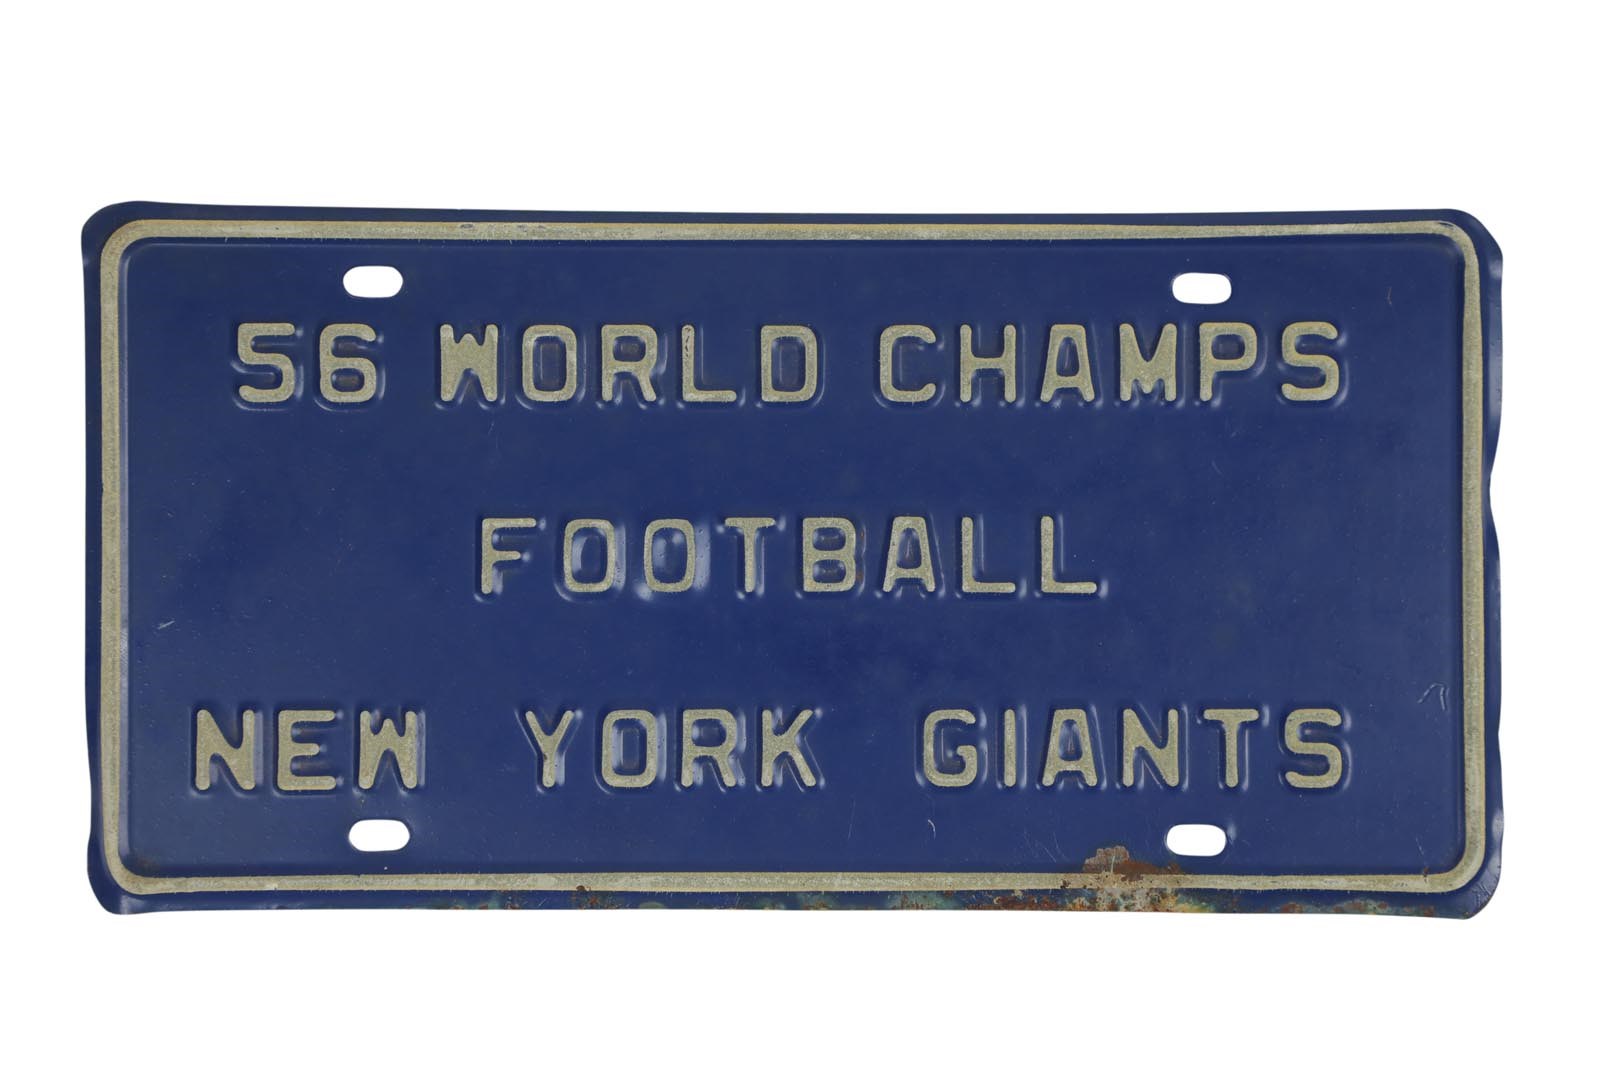 Football - 1956 World Champion New York Giants License Plate (Ken MacAfee Collection)